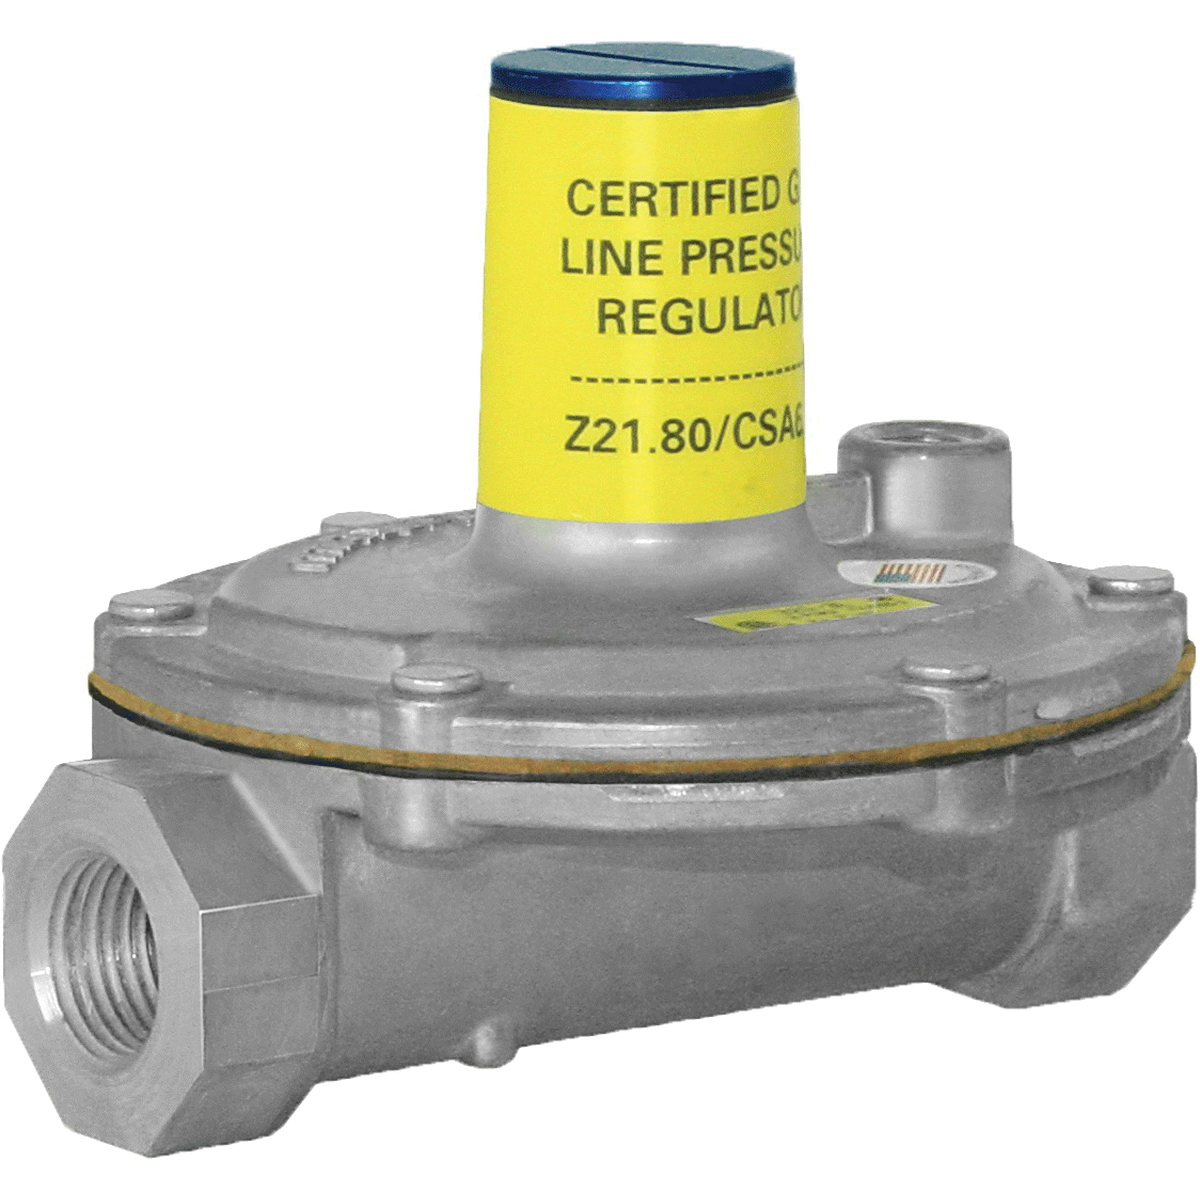 Maxitrol® 325-5L 325-5L-1/2 Gas Pressure Regulator With 12A09 Vent Limiter, 1/2 in Nominal, NPT Connection